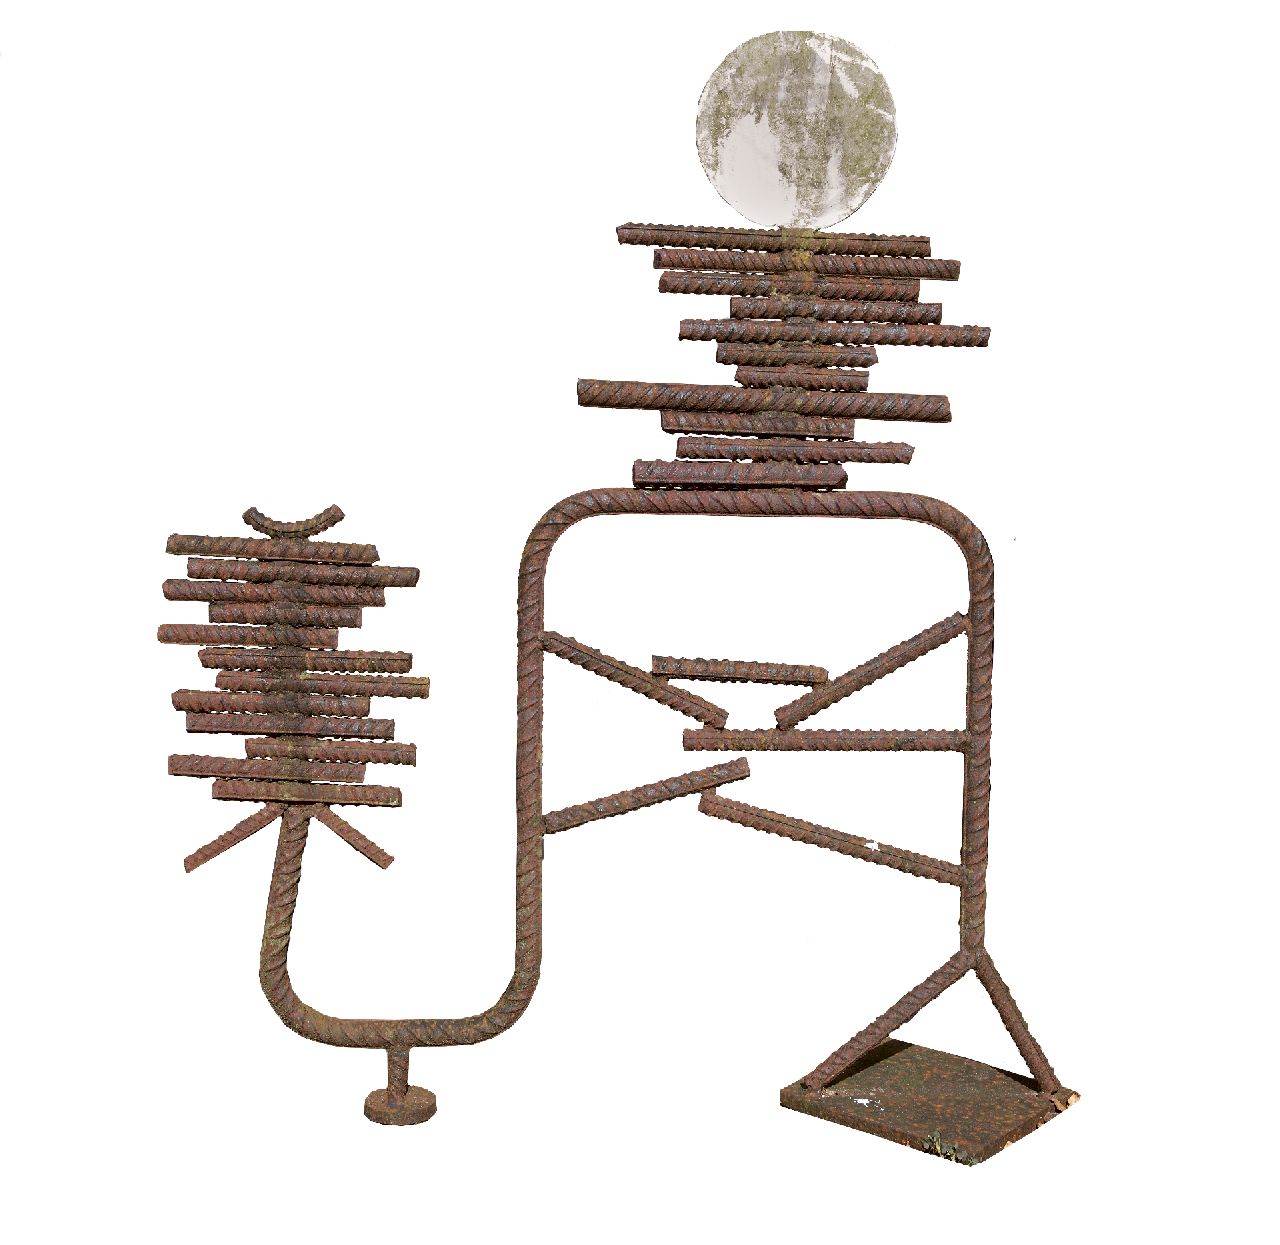 Niermeijer Th.  | Theo Niermeijer | Sculptures and objects offered for sale | Composition, oxidized steel 131.5 x 110.0 cm